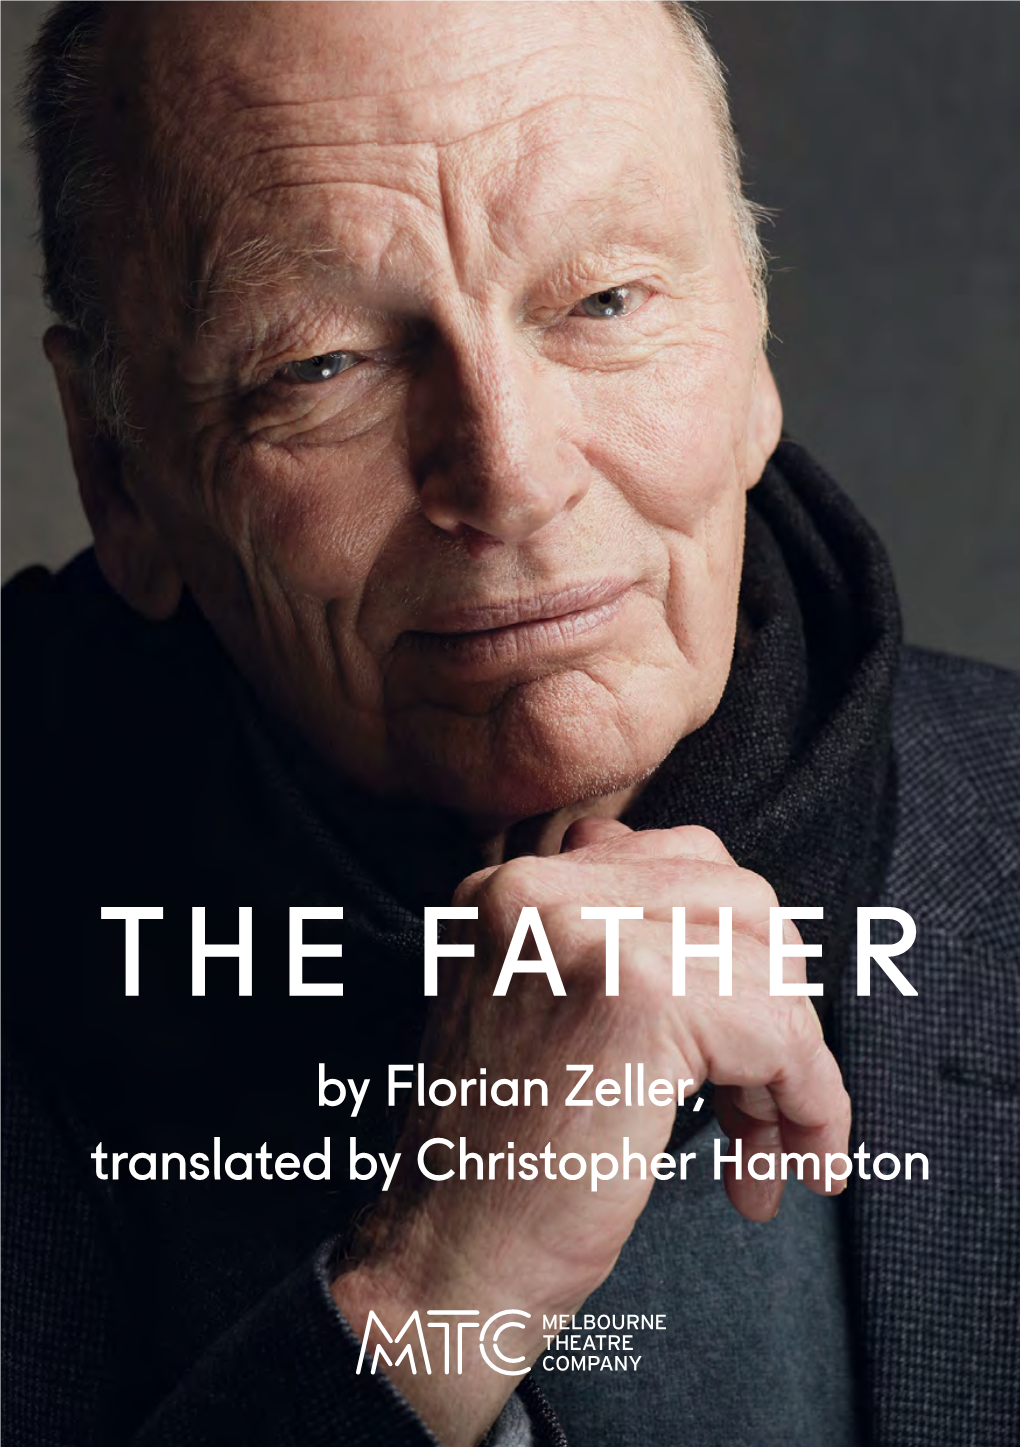 THE FATHER by Florian Zeller, Translated by Christopher Hampton Welcome